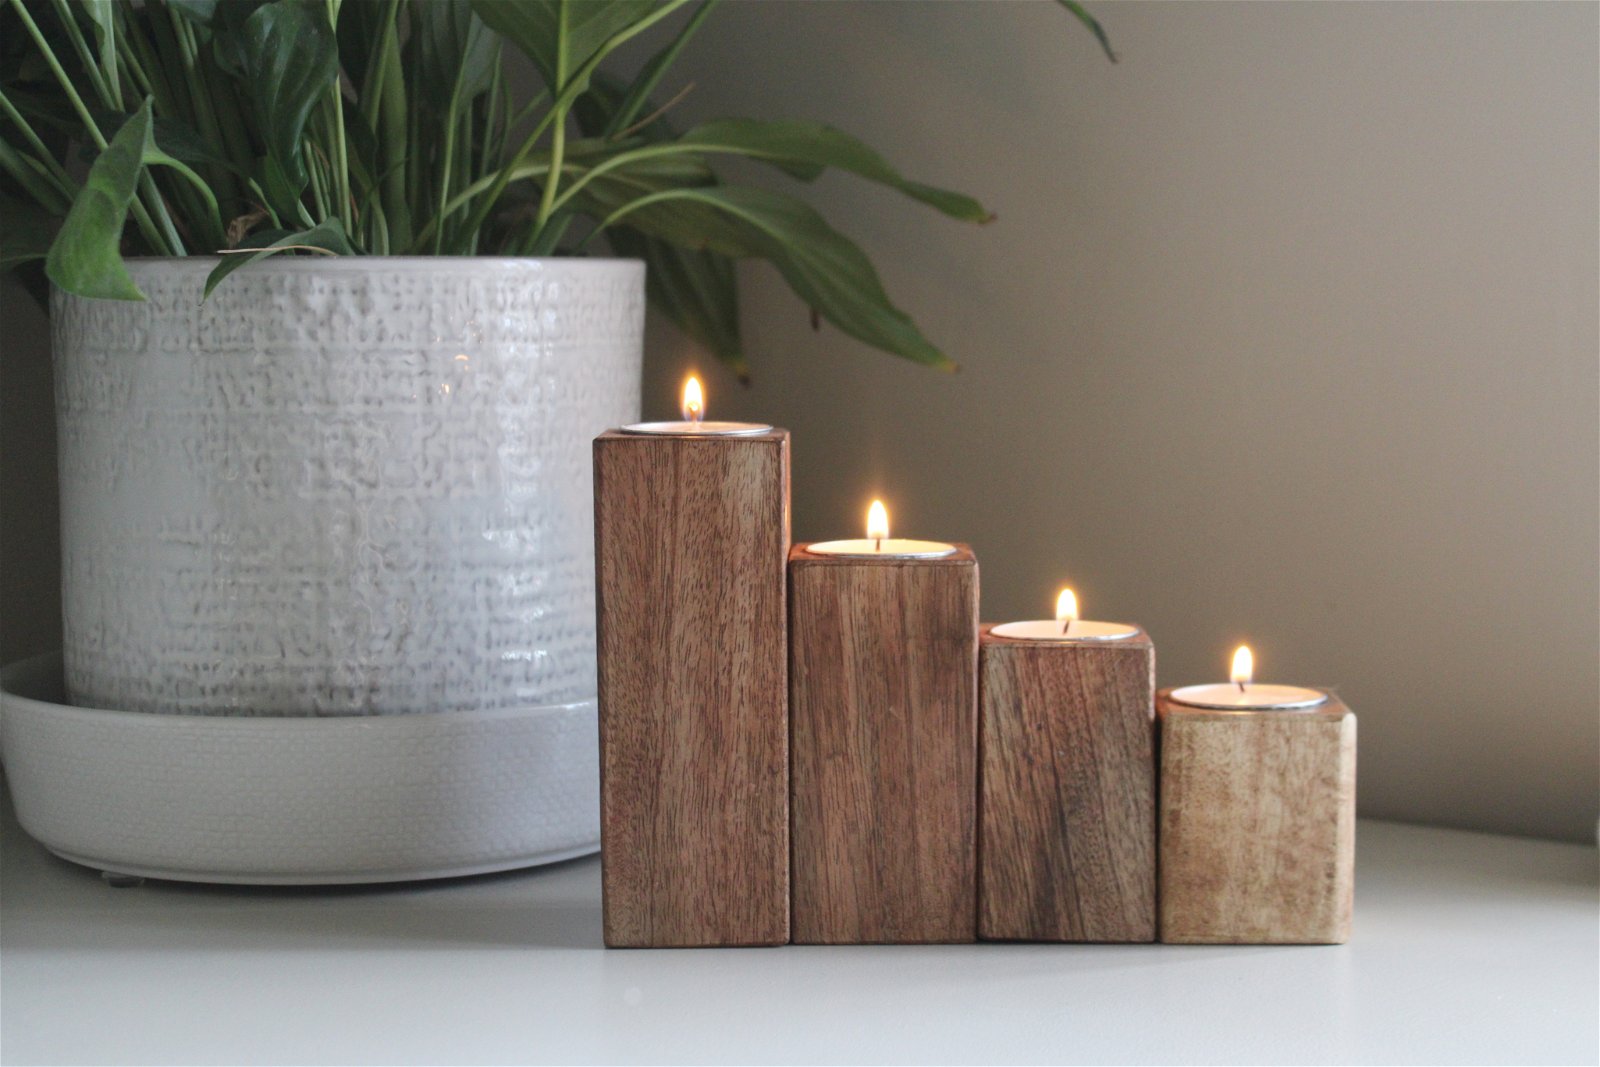 View Set of Four Mango Wood Tealight Holders information